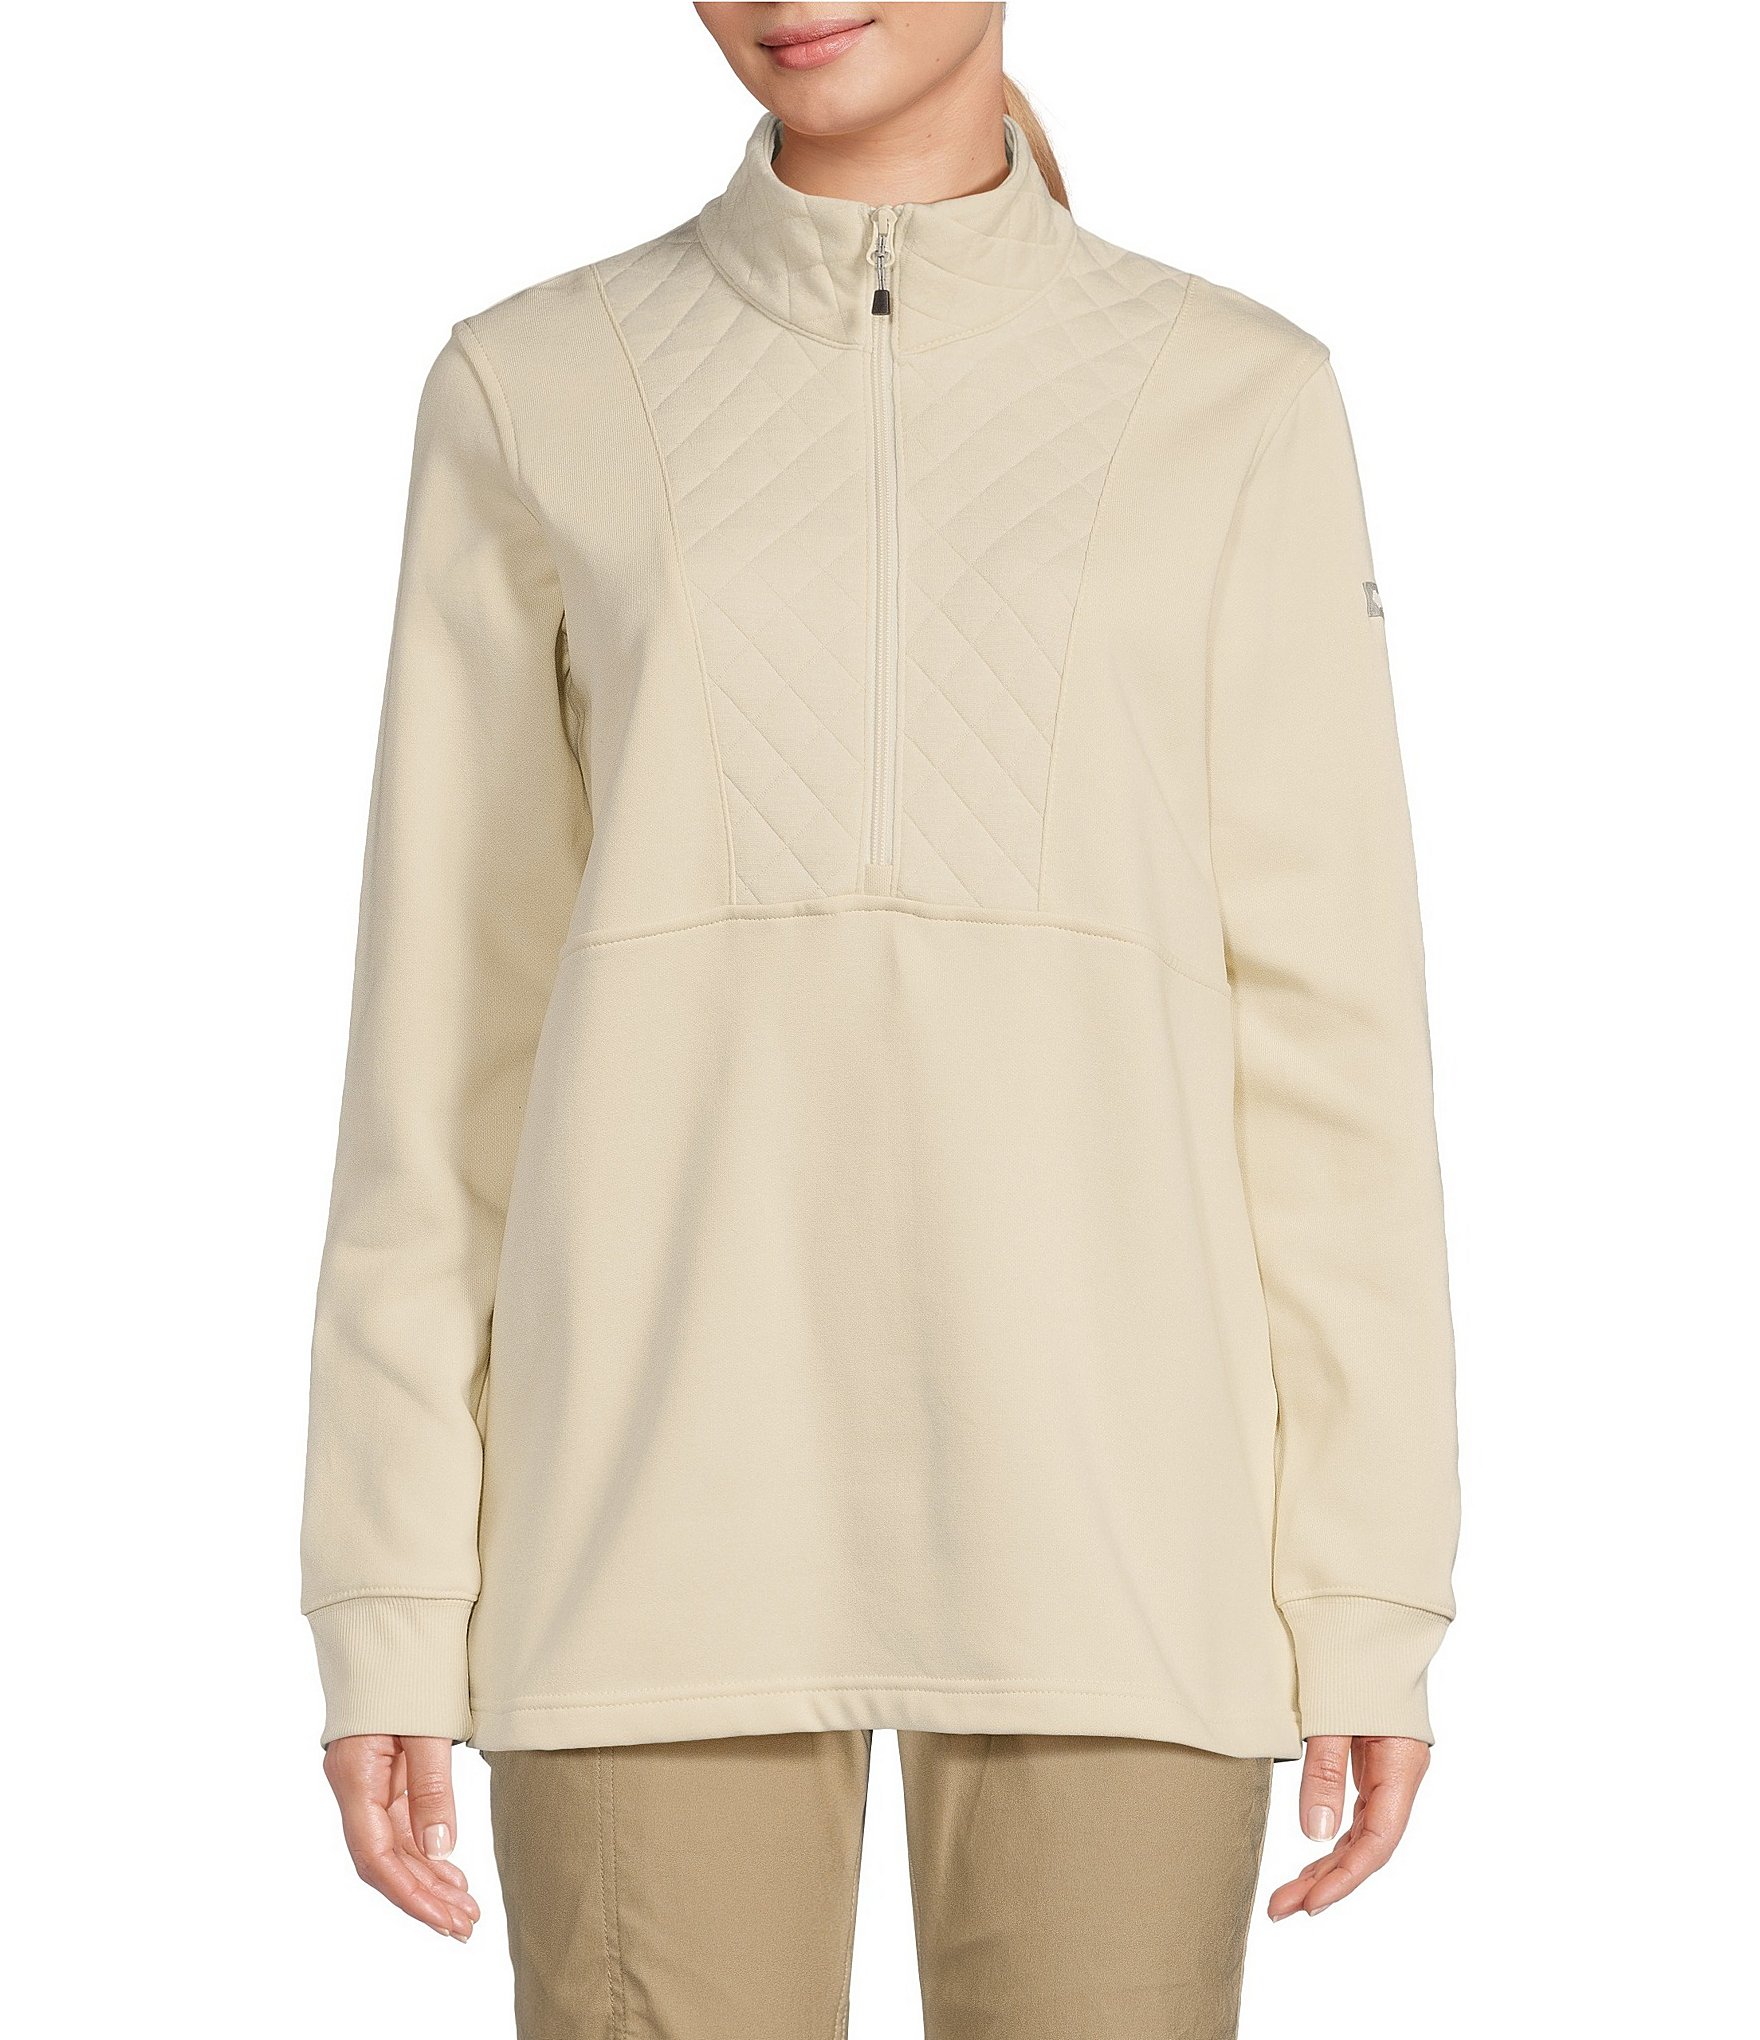 White Women's Outdoor and Performance Jackets & Hoodies| Dillard's